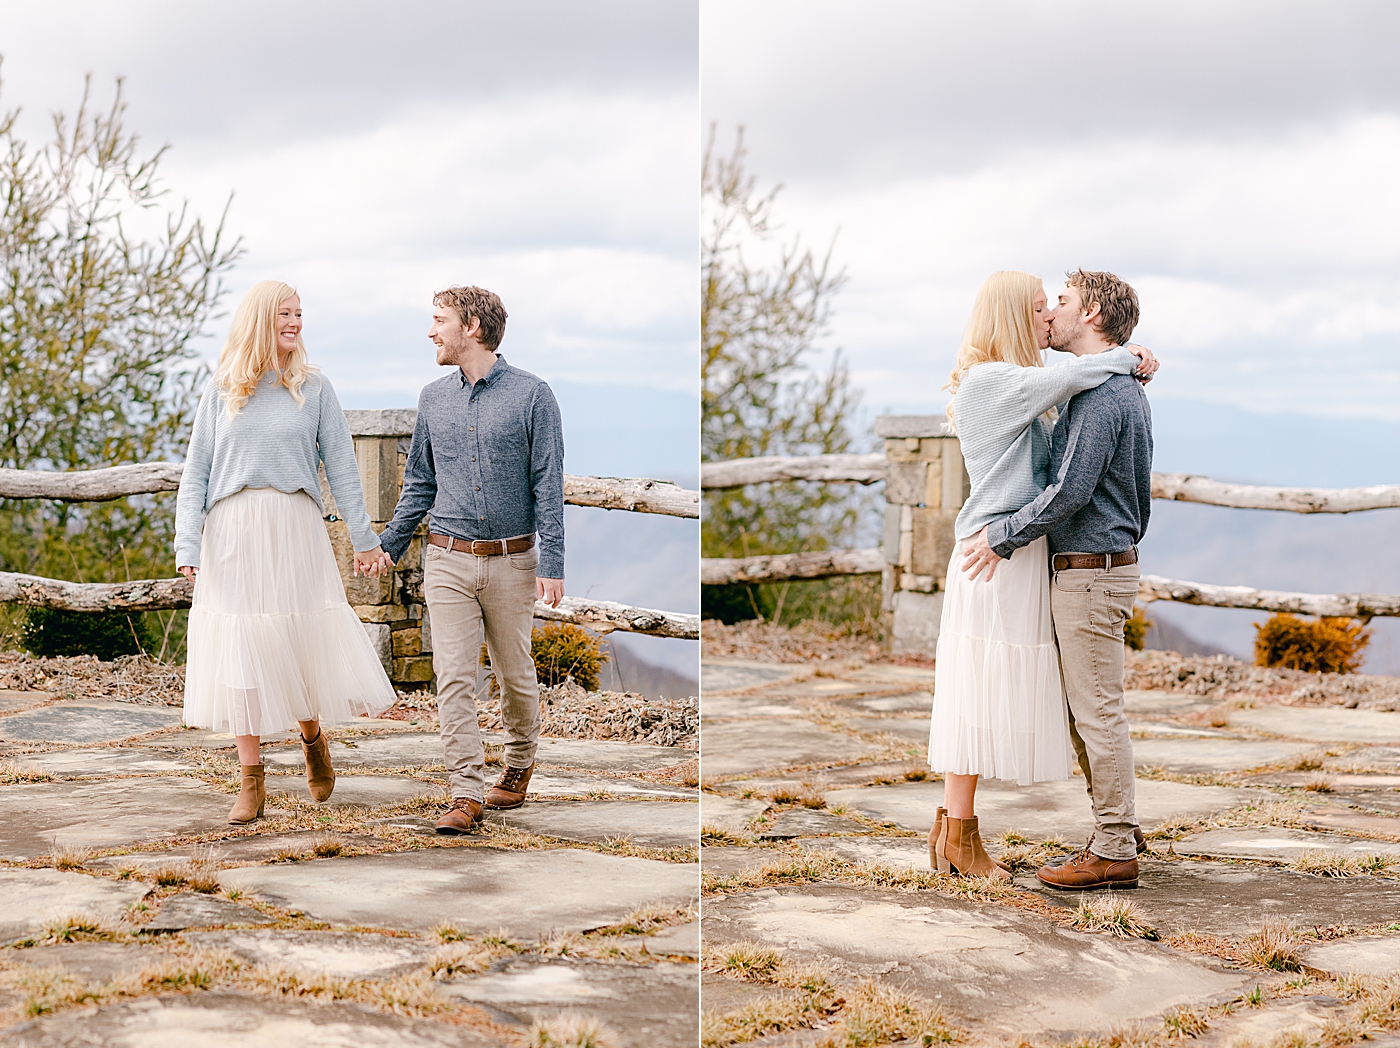 Couple walking holding hands during their Highlands Engagement Session | Image by Hope Helmuth Photography